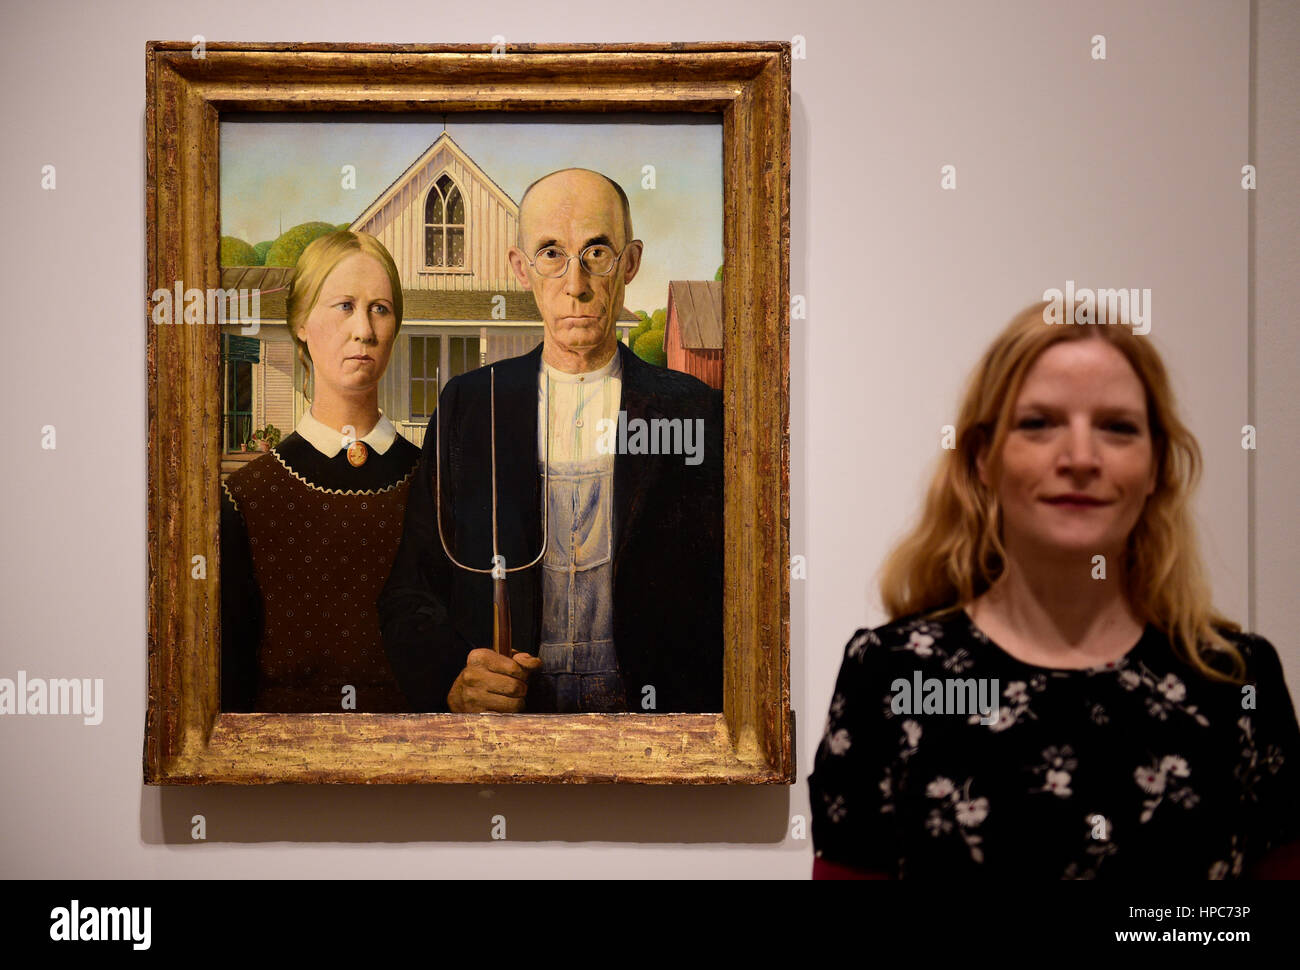 Royal Academy, London, UK. 21st Feb, 2017. America after the Fall: Painting in the 1930's, an exhibition chronicling the turbulent economic and political climate dominating the decade after the Wall Street Crash of 1929. Included in the exhibition is the iconic painting ‘American Gothic' by Grant Wood (photo), posed with a member of gallery staff, seen outside of America for the very first time, and works by Edward Hopper, Georgia O'Keefe, Jackson Pollock and Thomas Hart Benton. Credit: Malcolm Park editorial/Alamy Live News Stock Photo